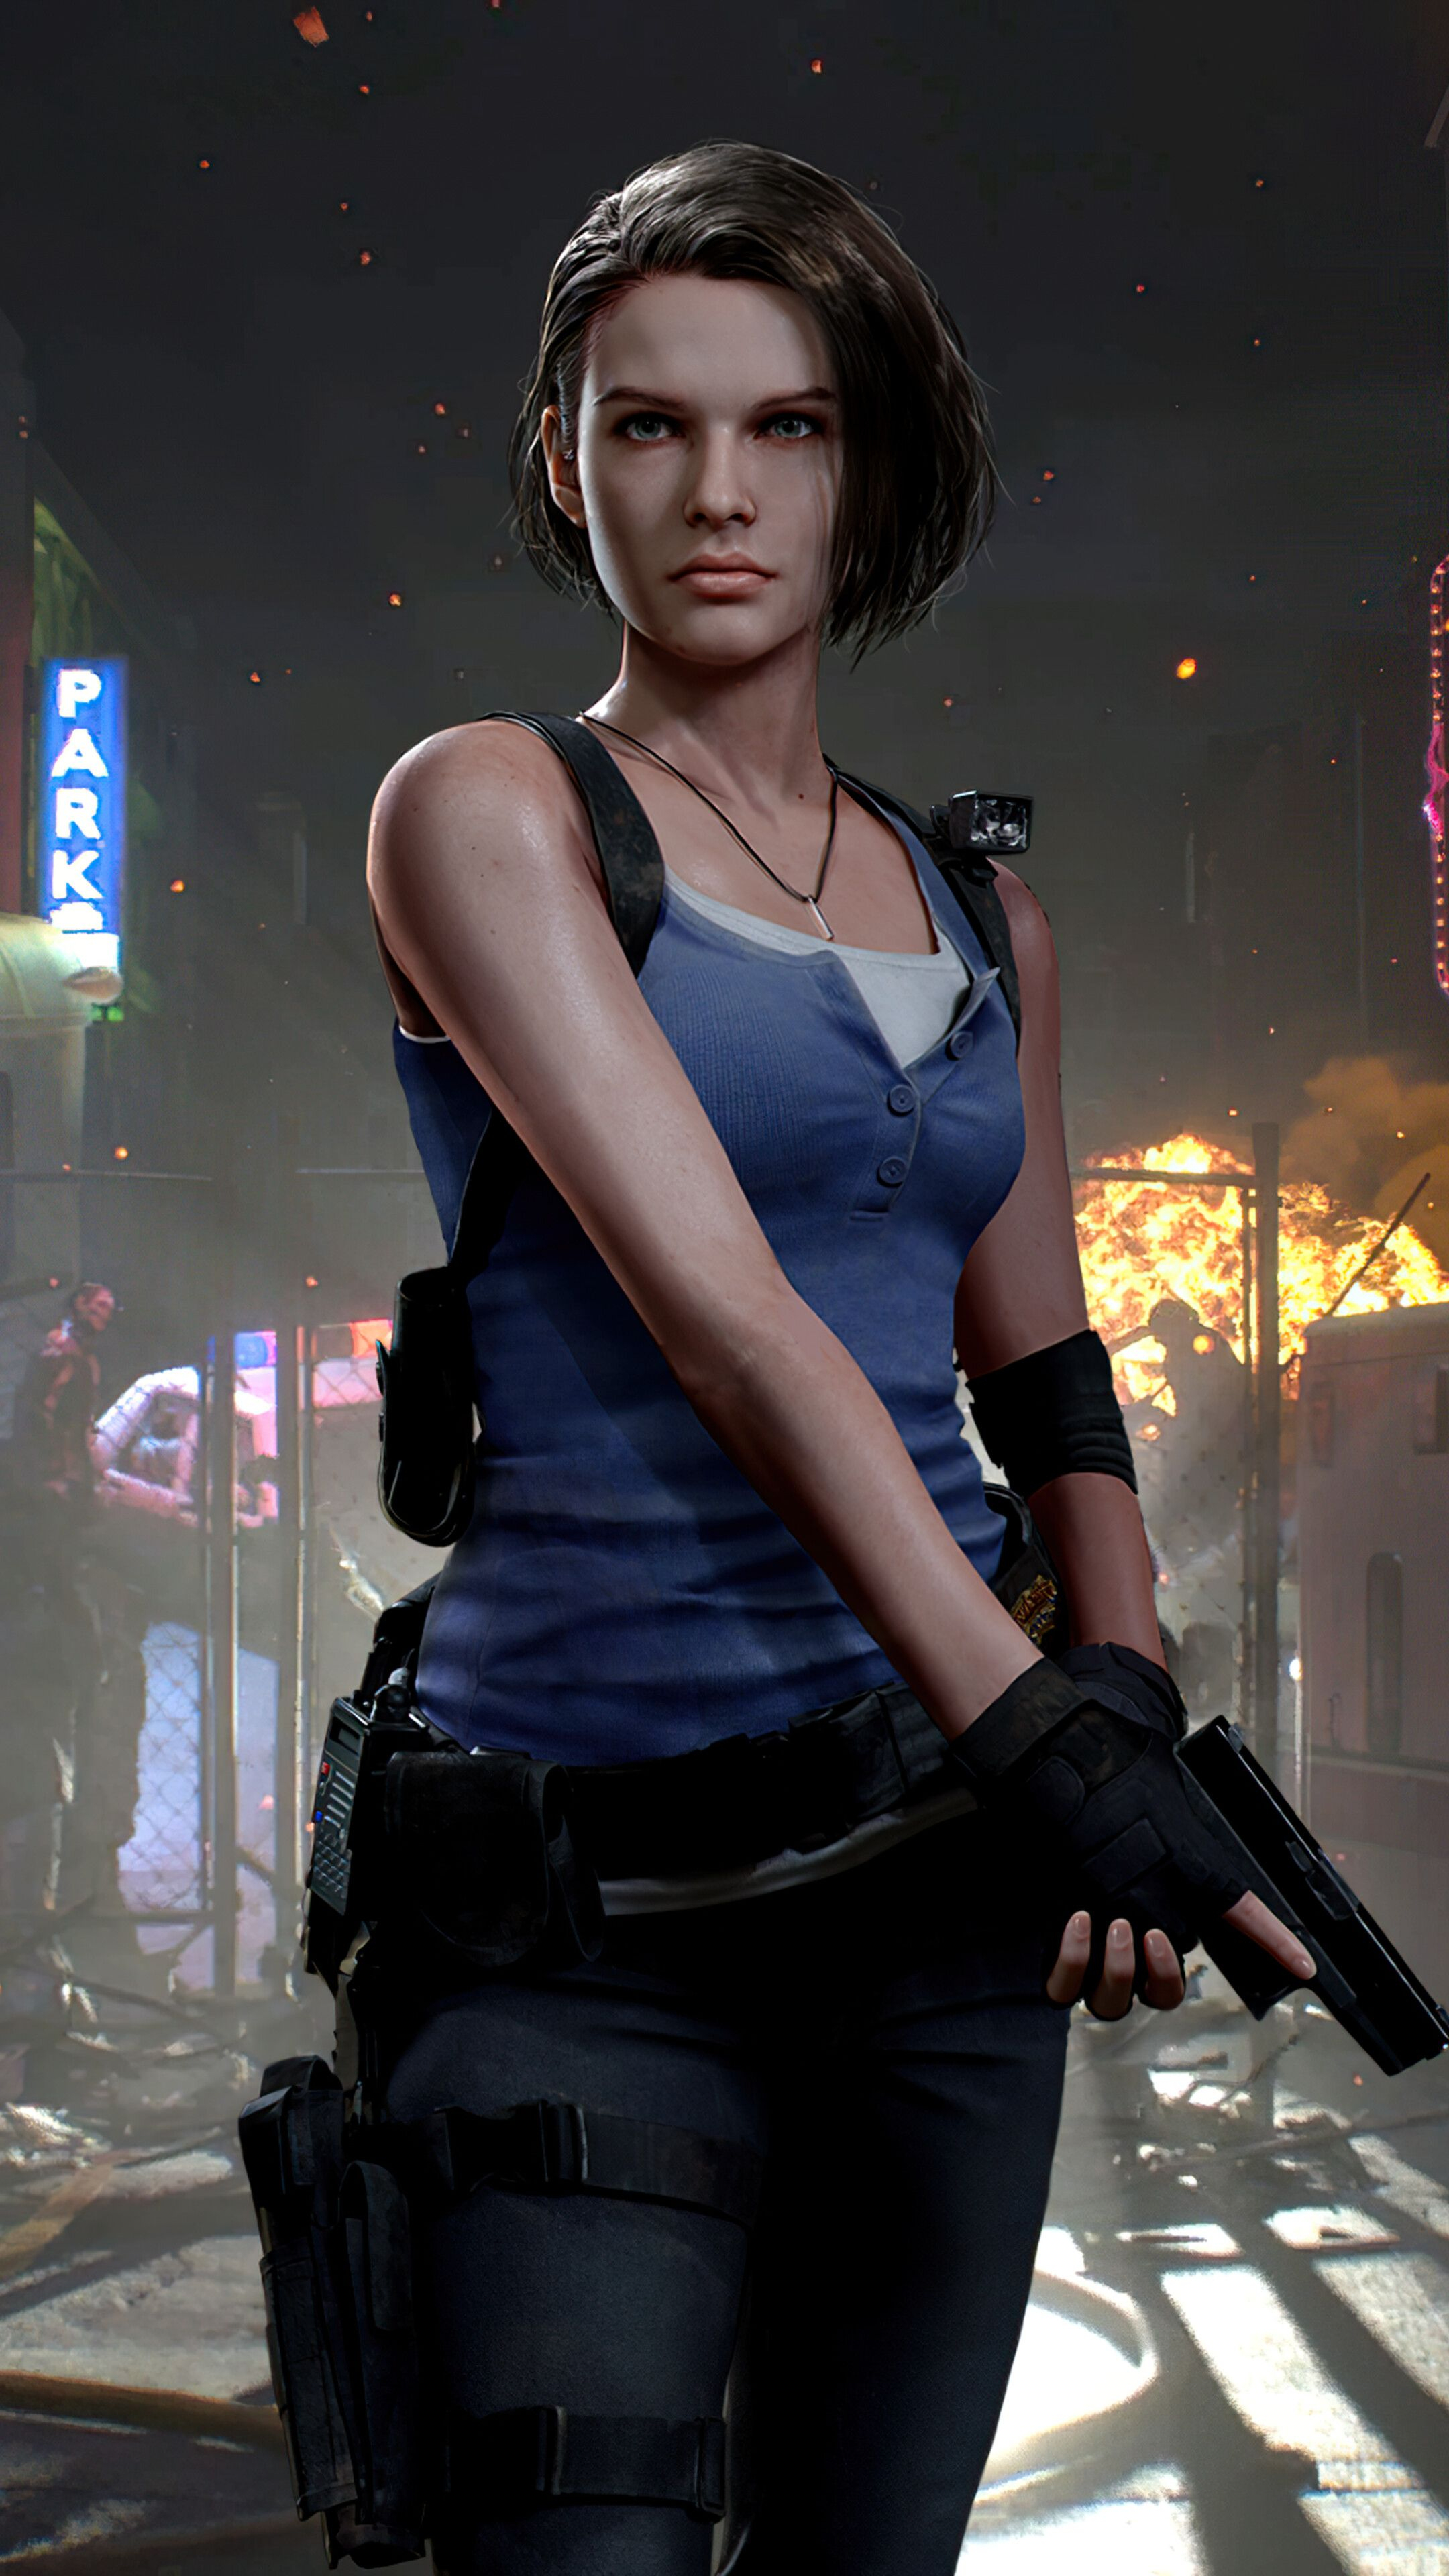 2160x3840 Jill Valentine, Resident Evil 3 Remake, 4K Iphone 10,7,6s,6 HD Wallpapers, Images, Backgrounds, Photos &acirc;&#128;&brvbar; | Resident evil girl, Resident evil 3 remake, Resident evil